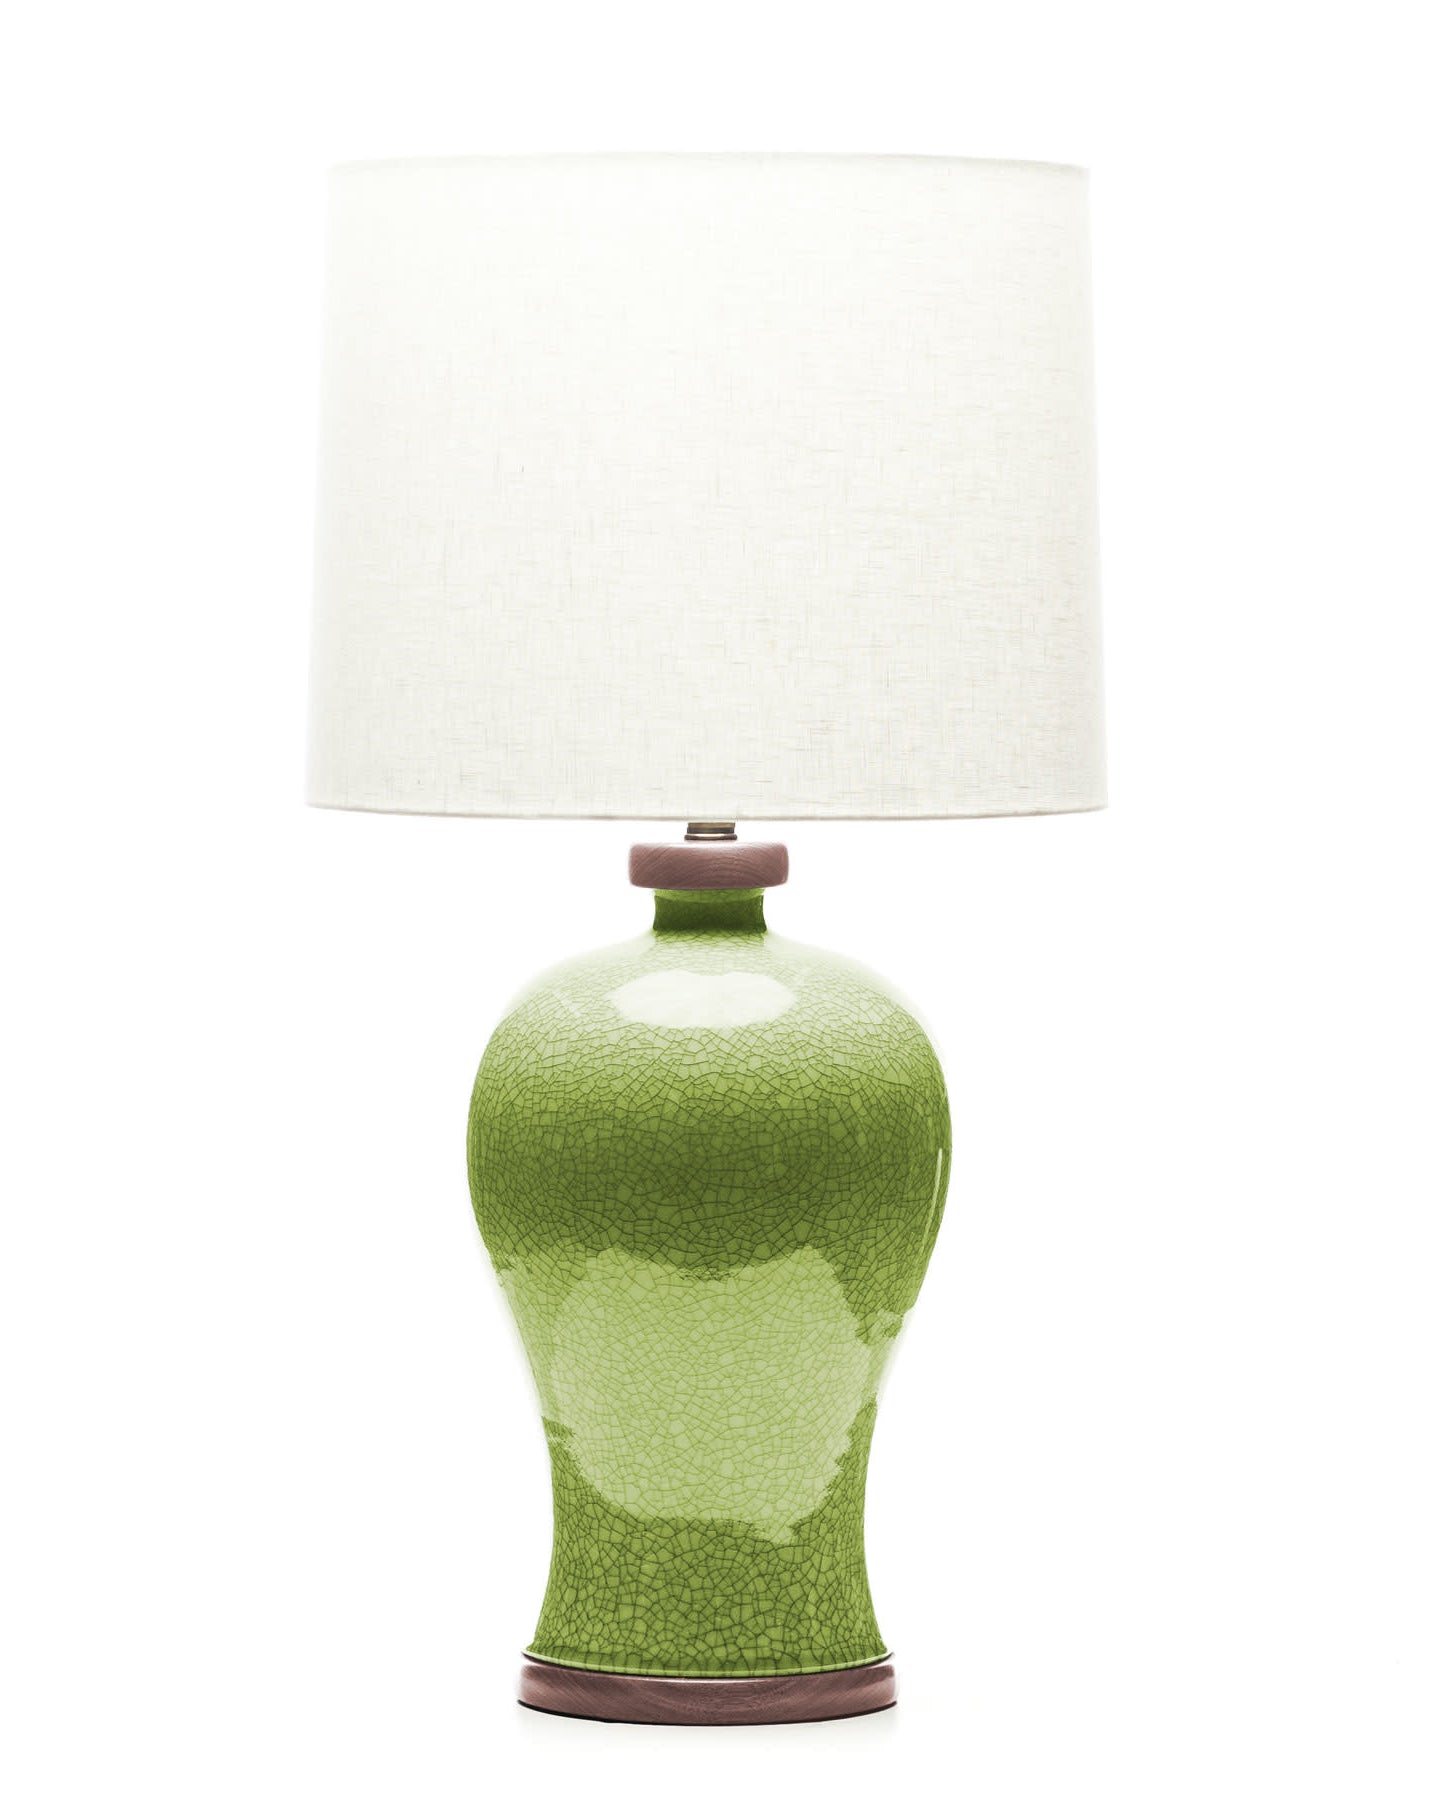 Lawrence & Scott Dashiell Table Lamp in Celadon Crackle with Sapele Base